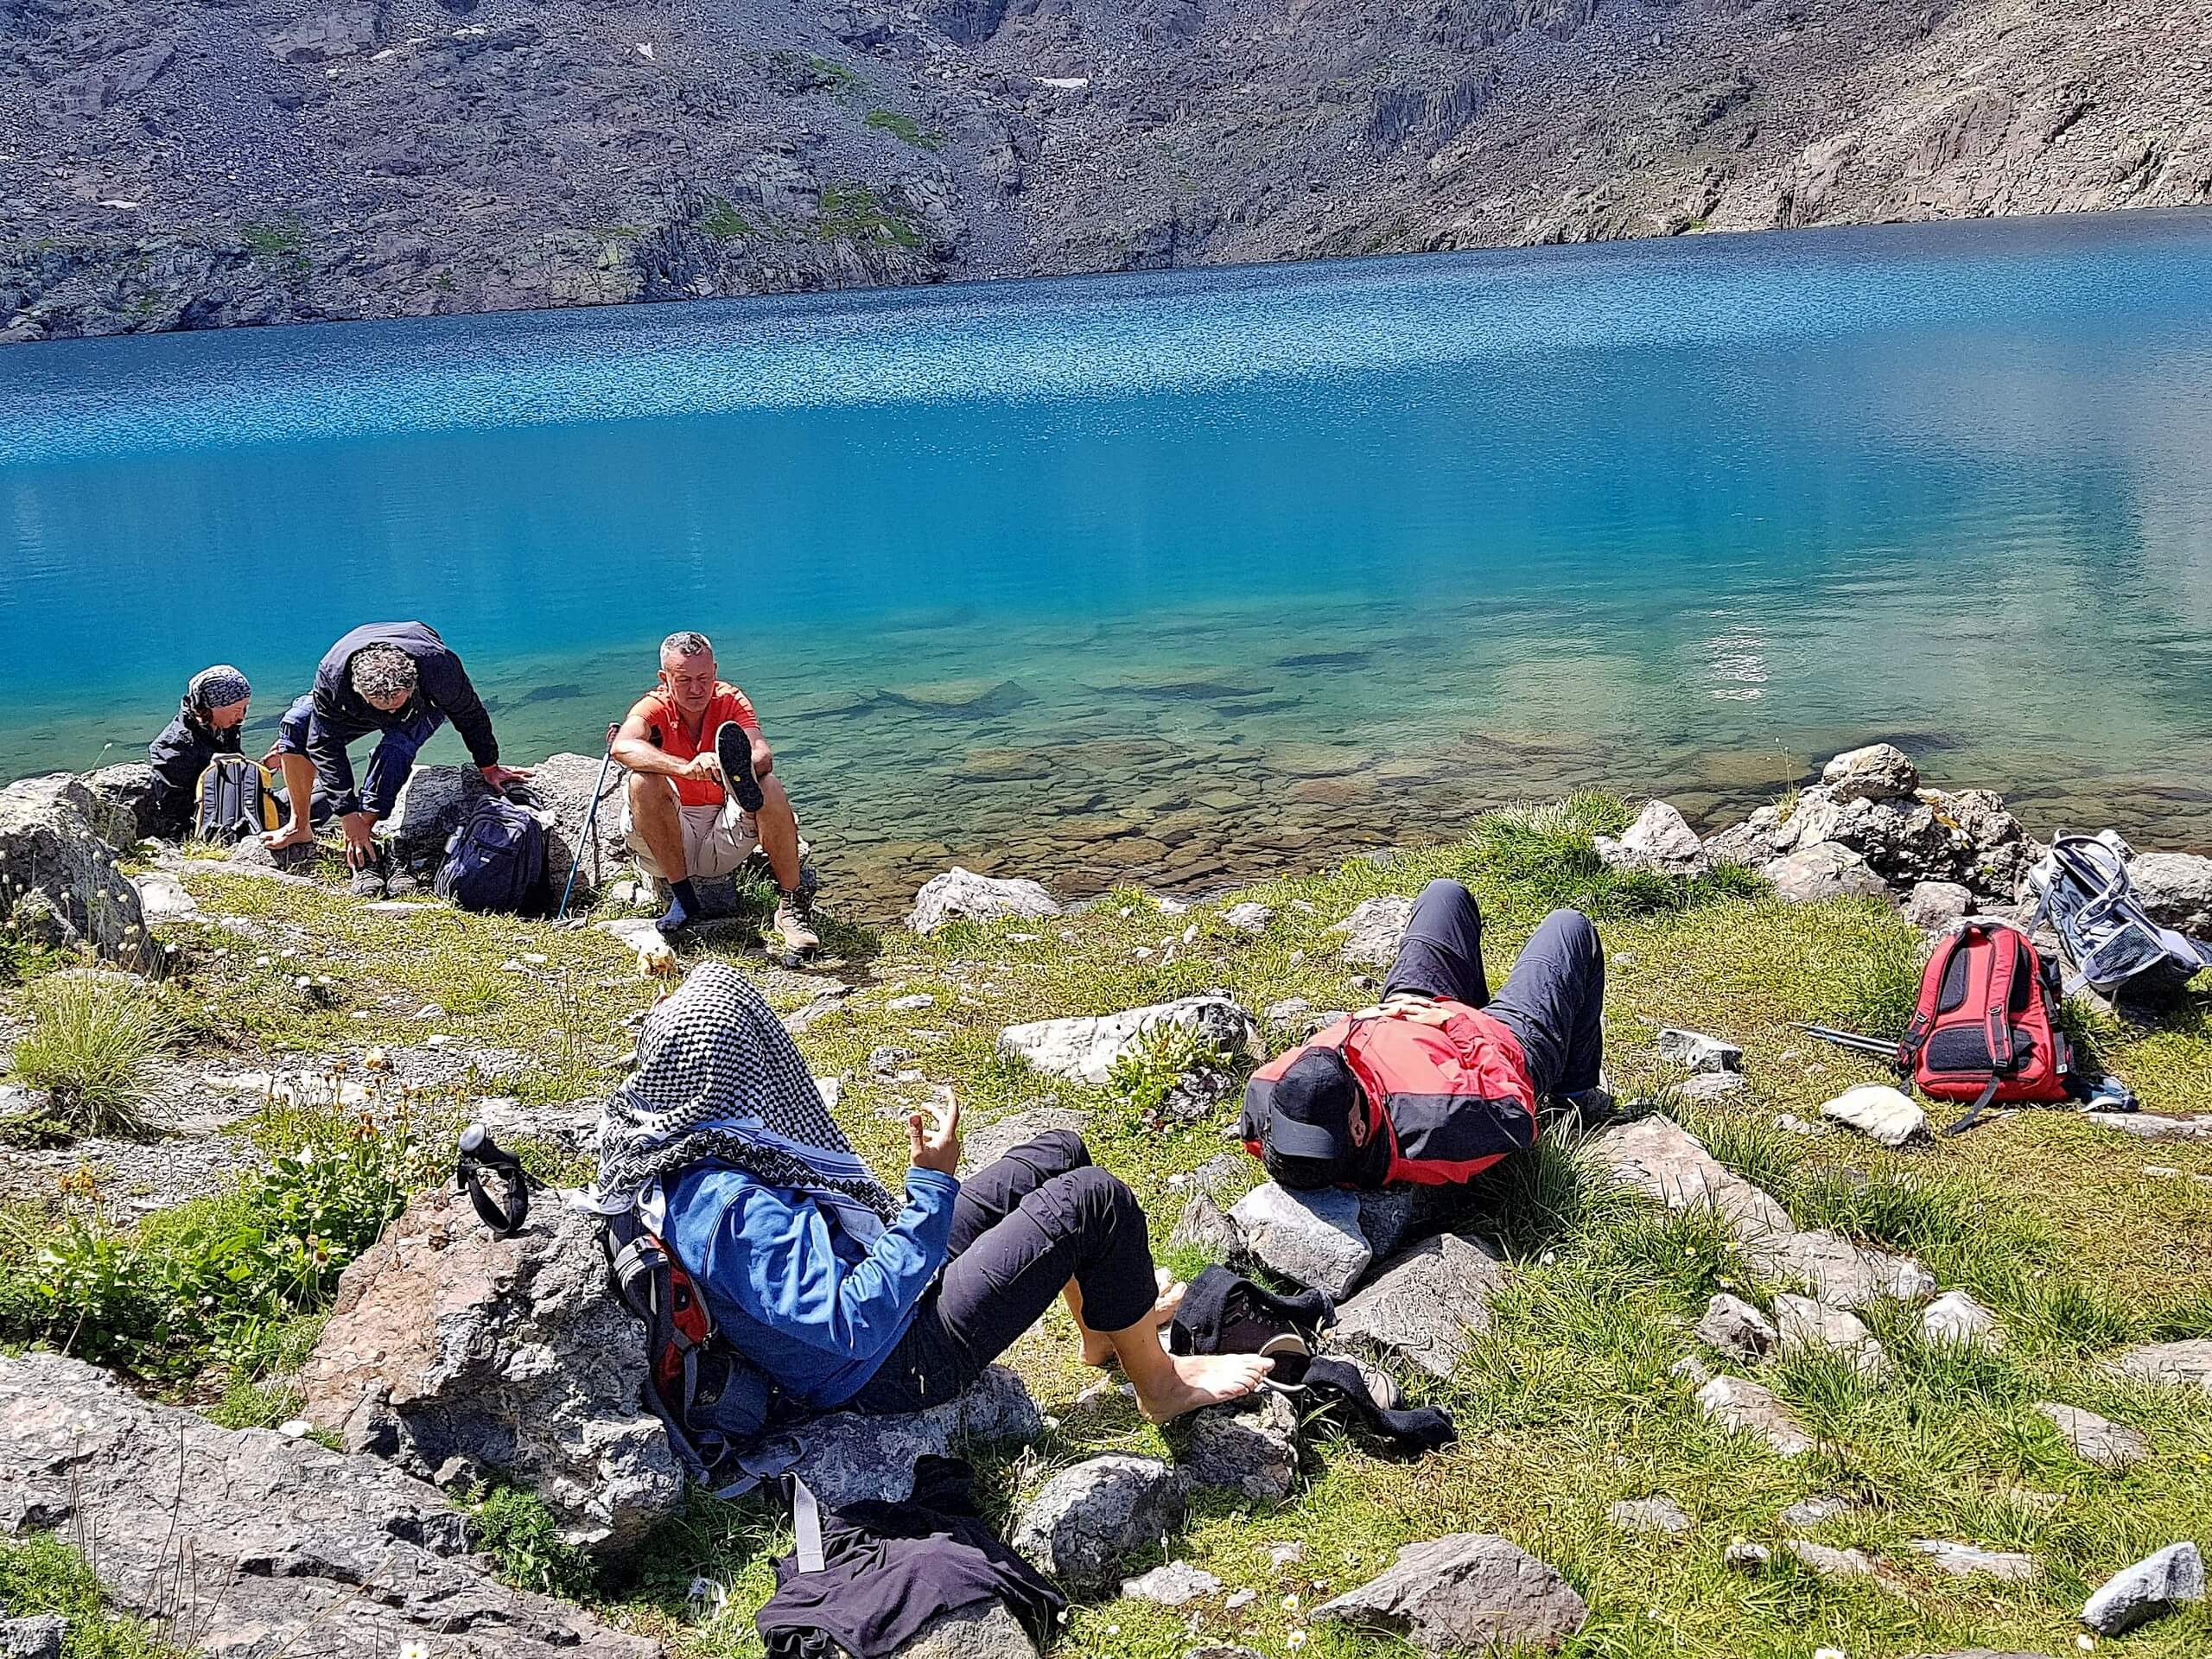 Group of hikers resting near the turqoise lake in Kackar Mountains